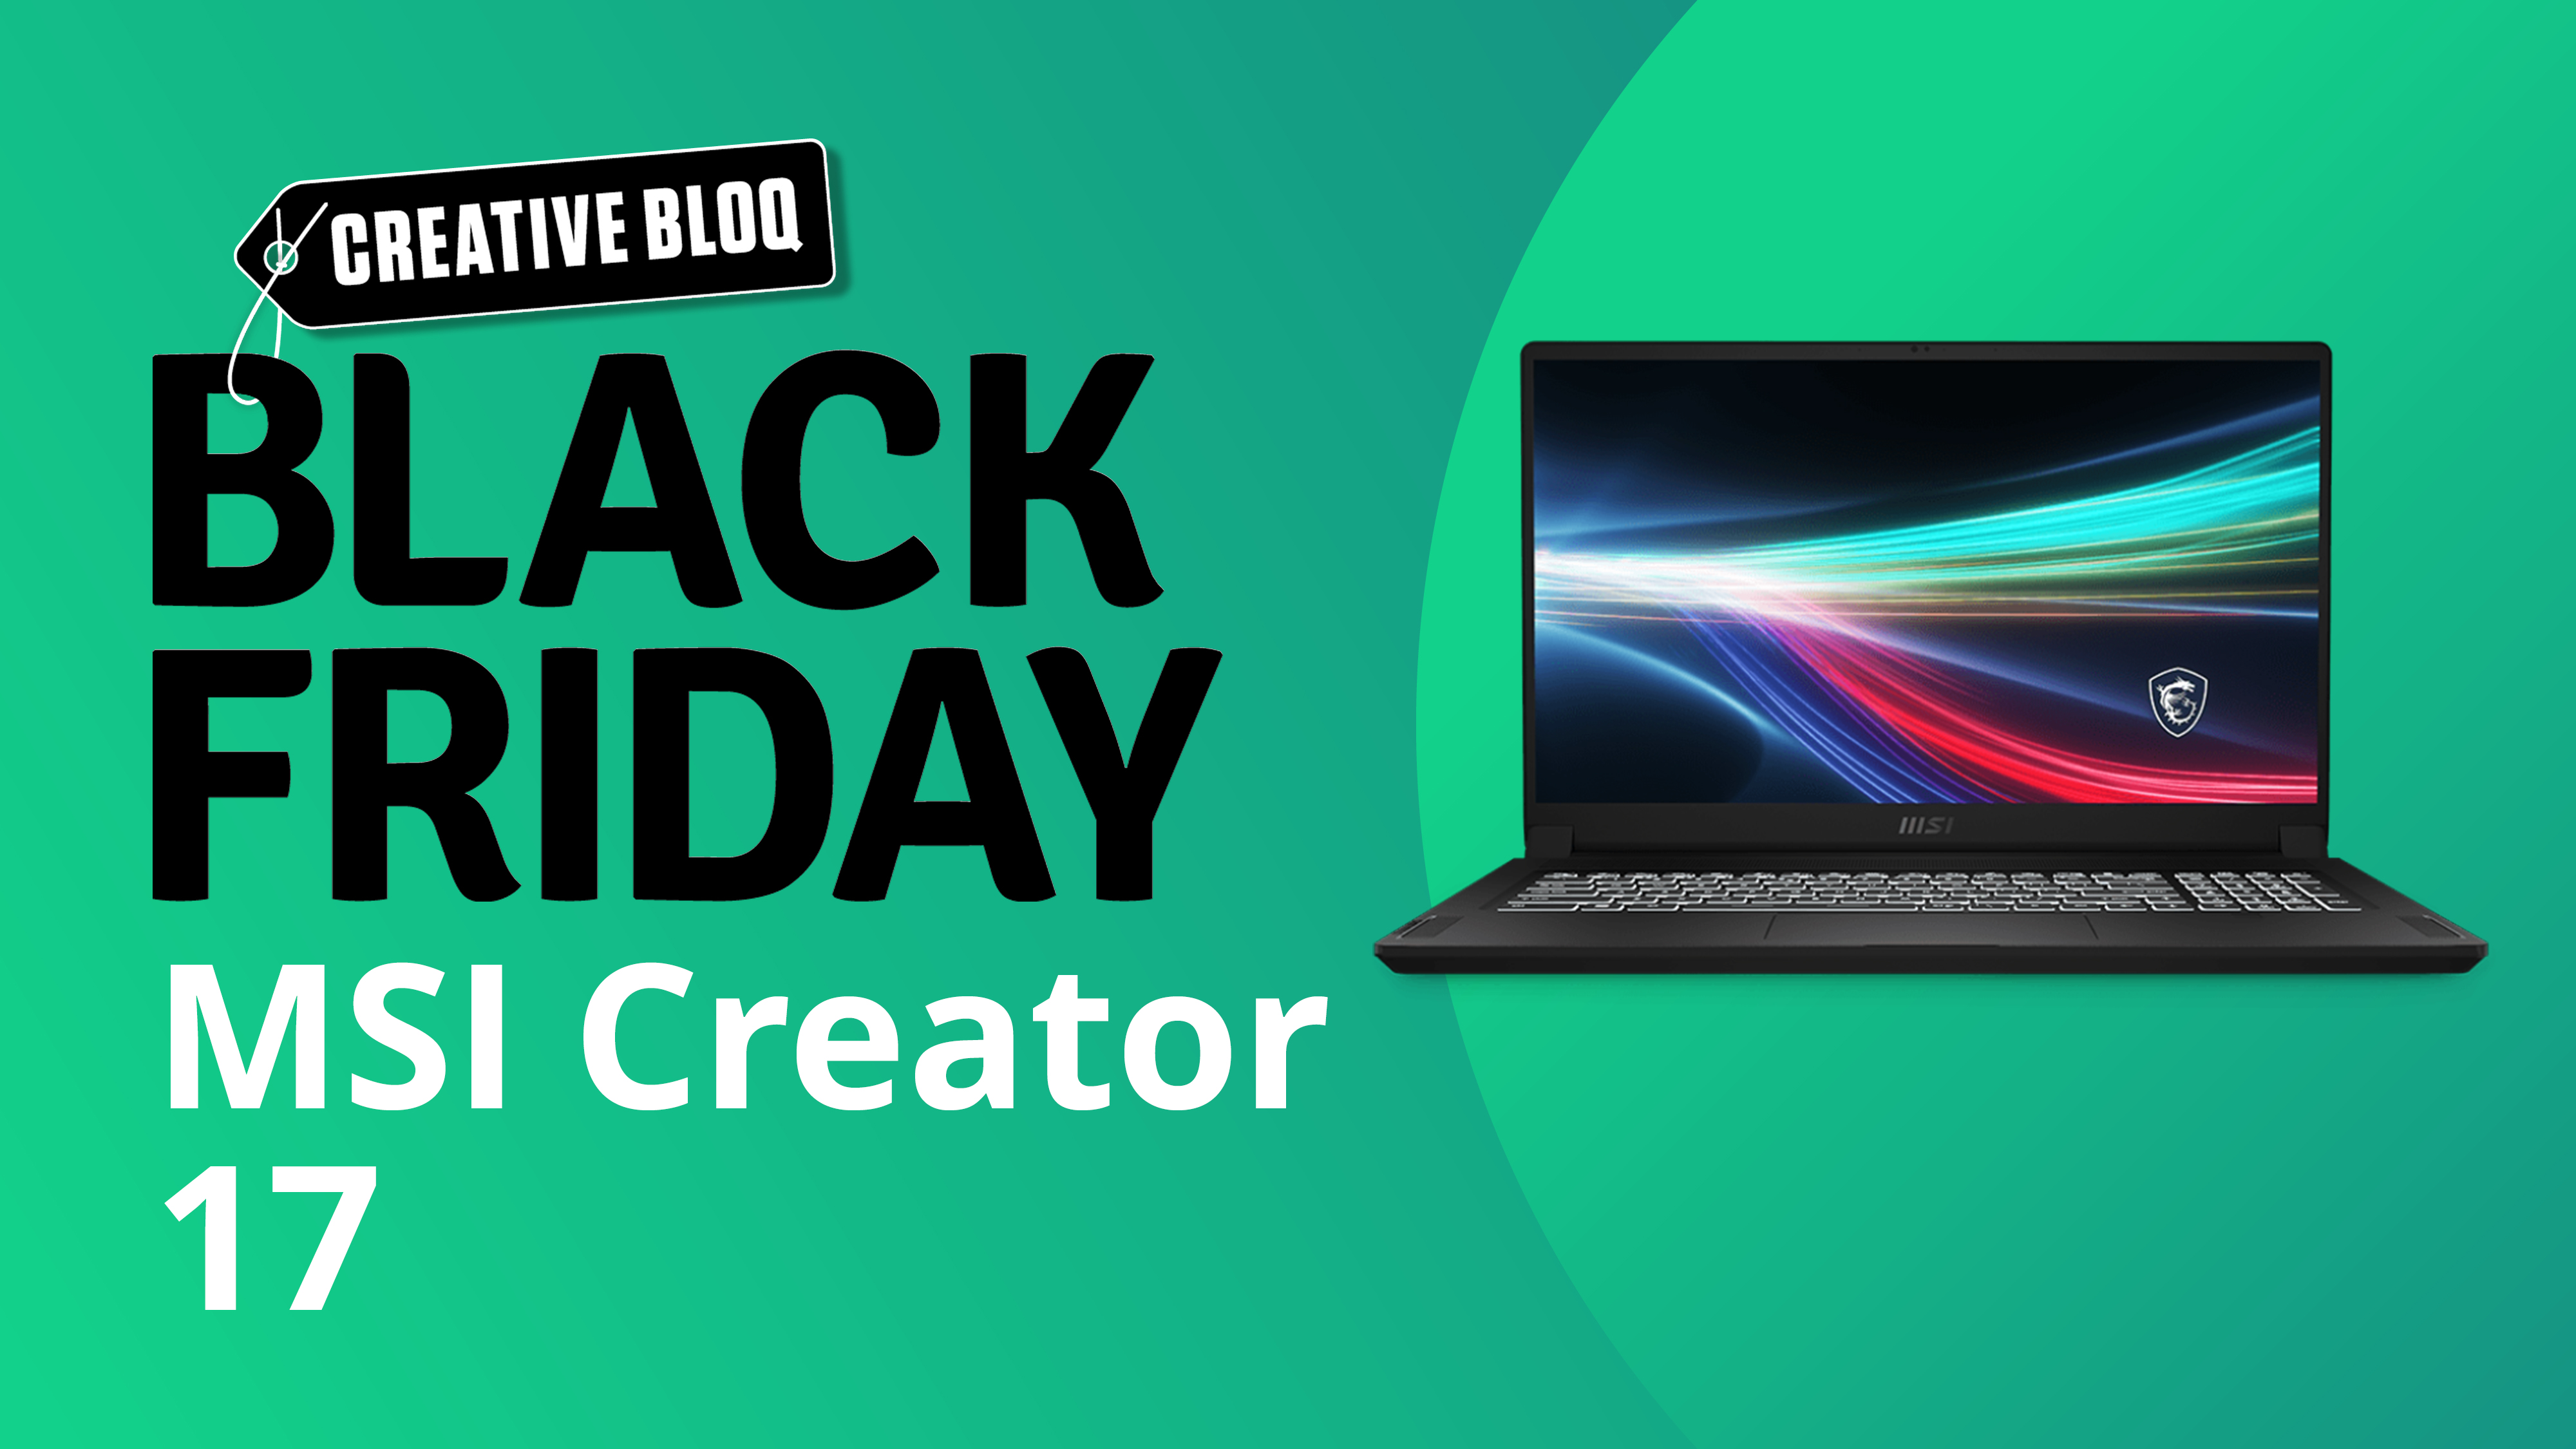 A Black Friday laptop process image with the text Creative Bloq Black Friday MSI Creator 17 next to an image of a laptop on a green background